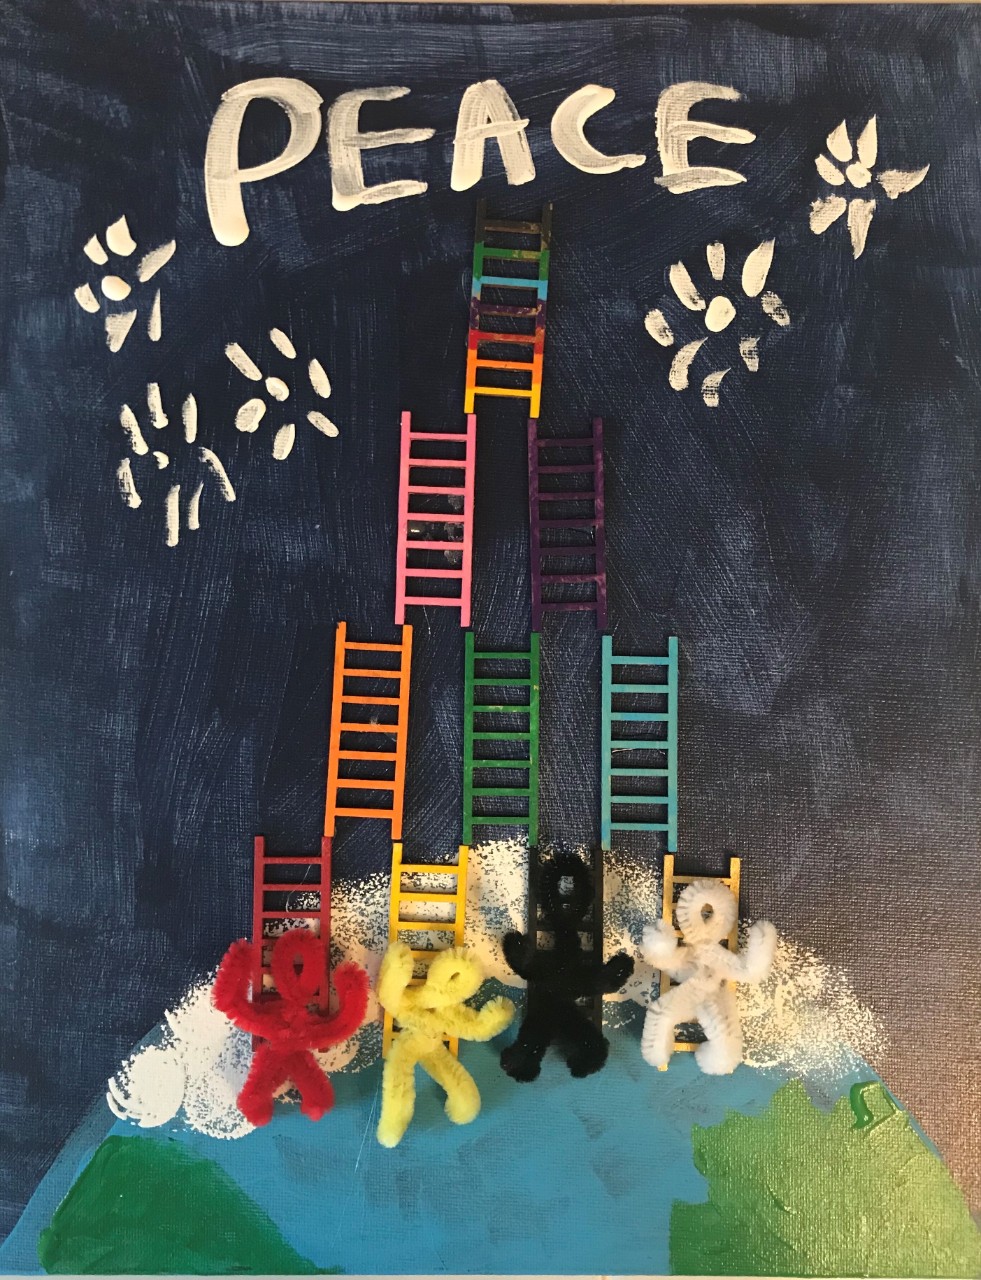 A mixed-media piece. The canvas is painted blue and the Earth is painted at the bottom of the piece. There are figures of people shown with different colored pipe cleaners glued onto the Earth, climbing an array of tiny colorful wooden ladders also glued to the canvas.  They are climbing up to the top of the canvas where the word “Peace” is written in white paint.